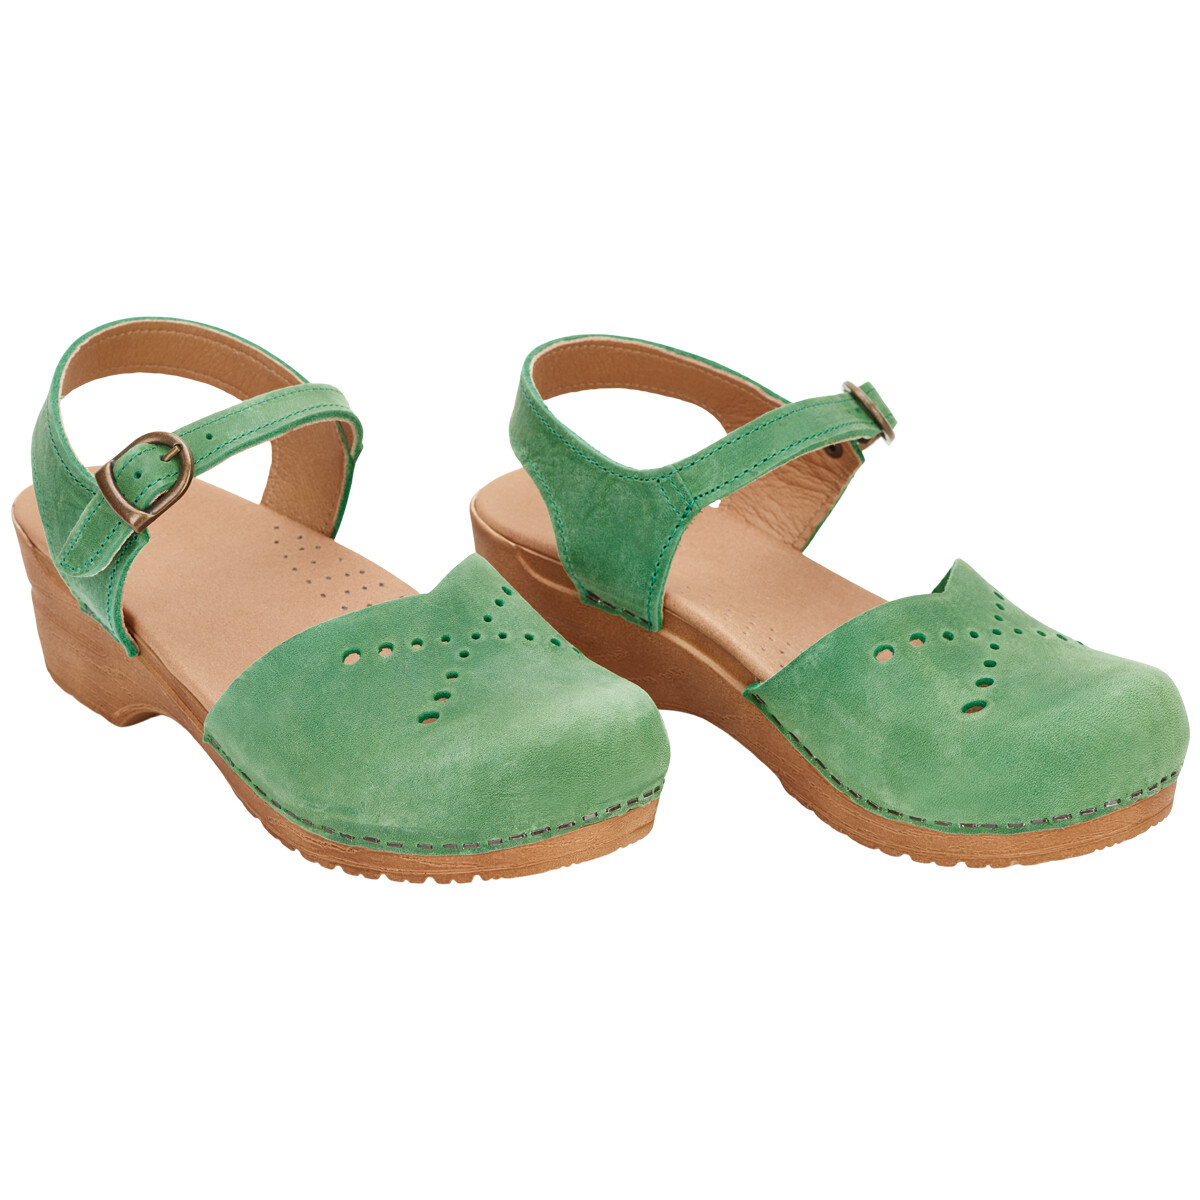 Clog sandals from Sanita - Buy delicious clog sandals here